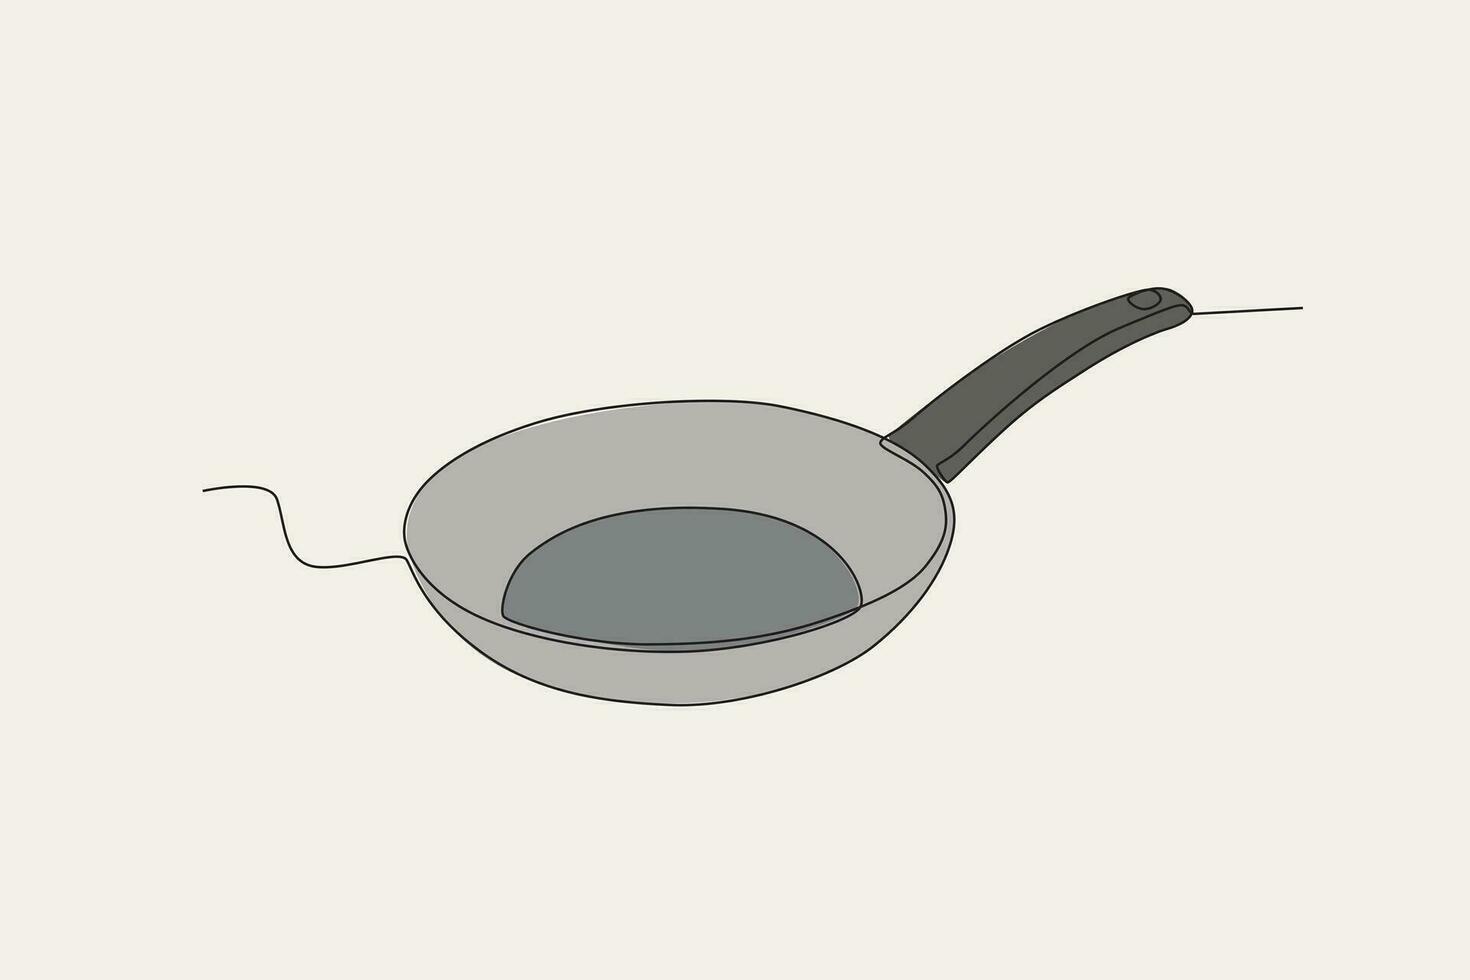 Color illustration of a frying pan vector